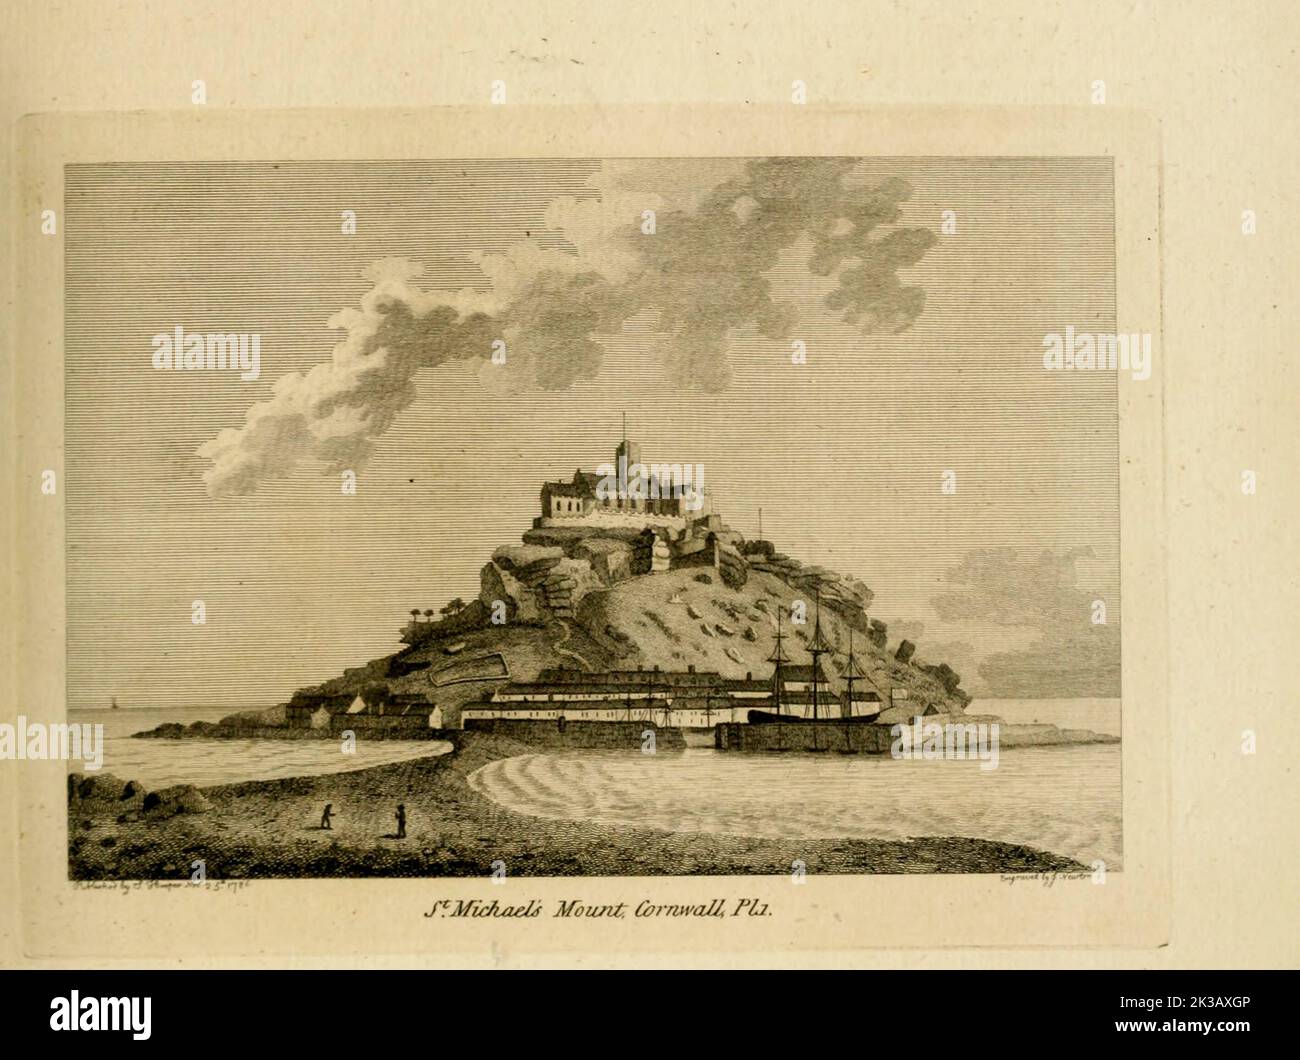 St Michael's Mount is a tidal island in Mount's Bay, Cornwall, England, United Kingdom. from the book ' Supplement to the antiquities of England and Wales ' by Francis Grose, Publication date 1777 Stock Photo